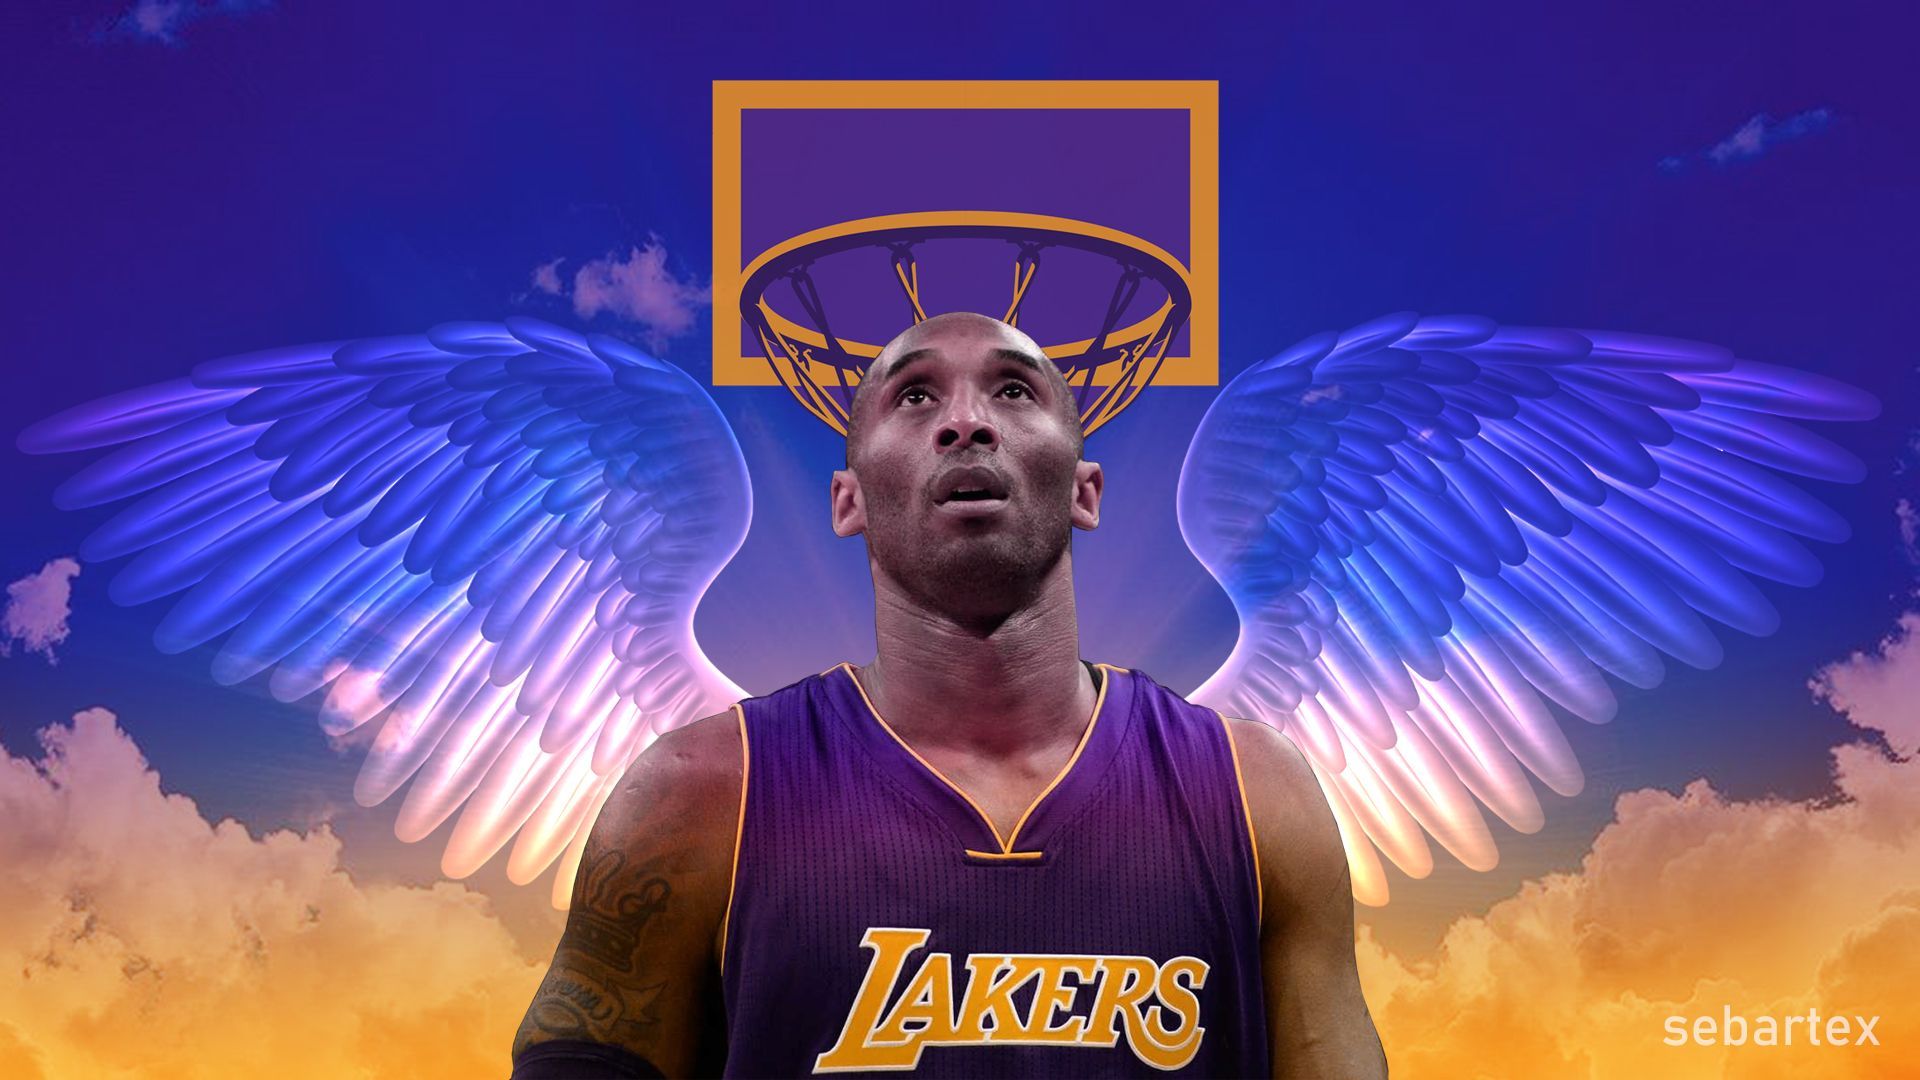 Cool Kobe Bryant Anime Wallpapers - Wallpaper Cave